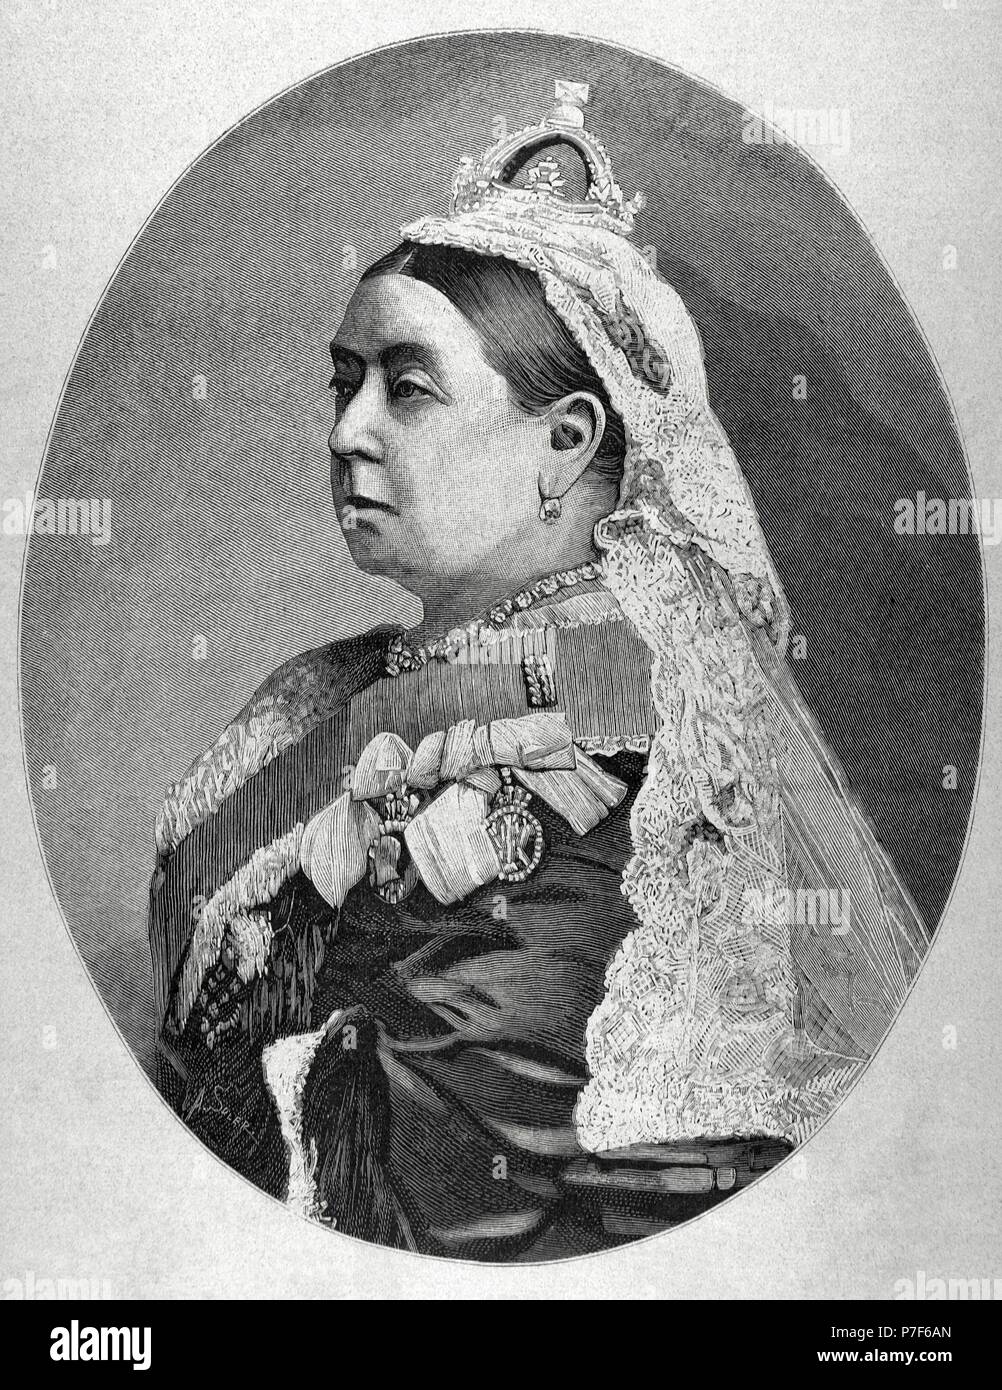 Victoria I (1819-1901). Queen of the United Kingdom of Great Britain and Ireland (1837-1901) and Empress of India (1876-1901). Portrait. Engraving by A. Soler. 'La Ilustracion Nacional', 1887. Stock Photo